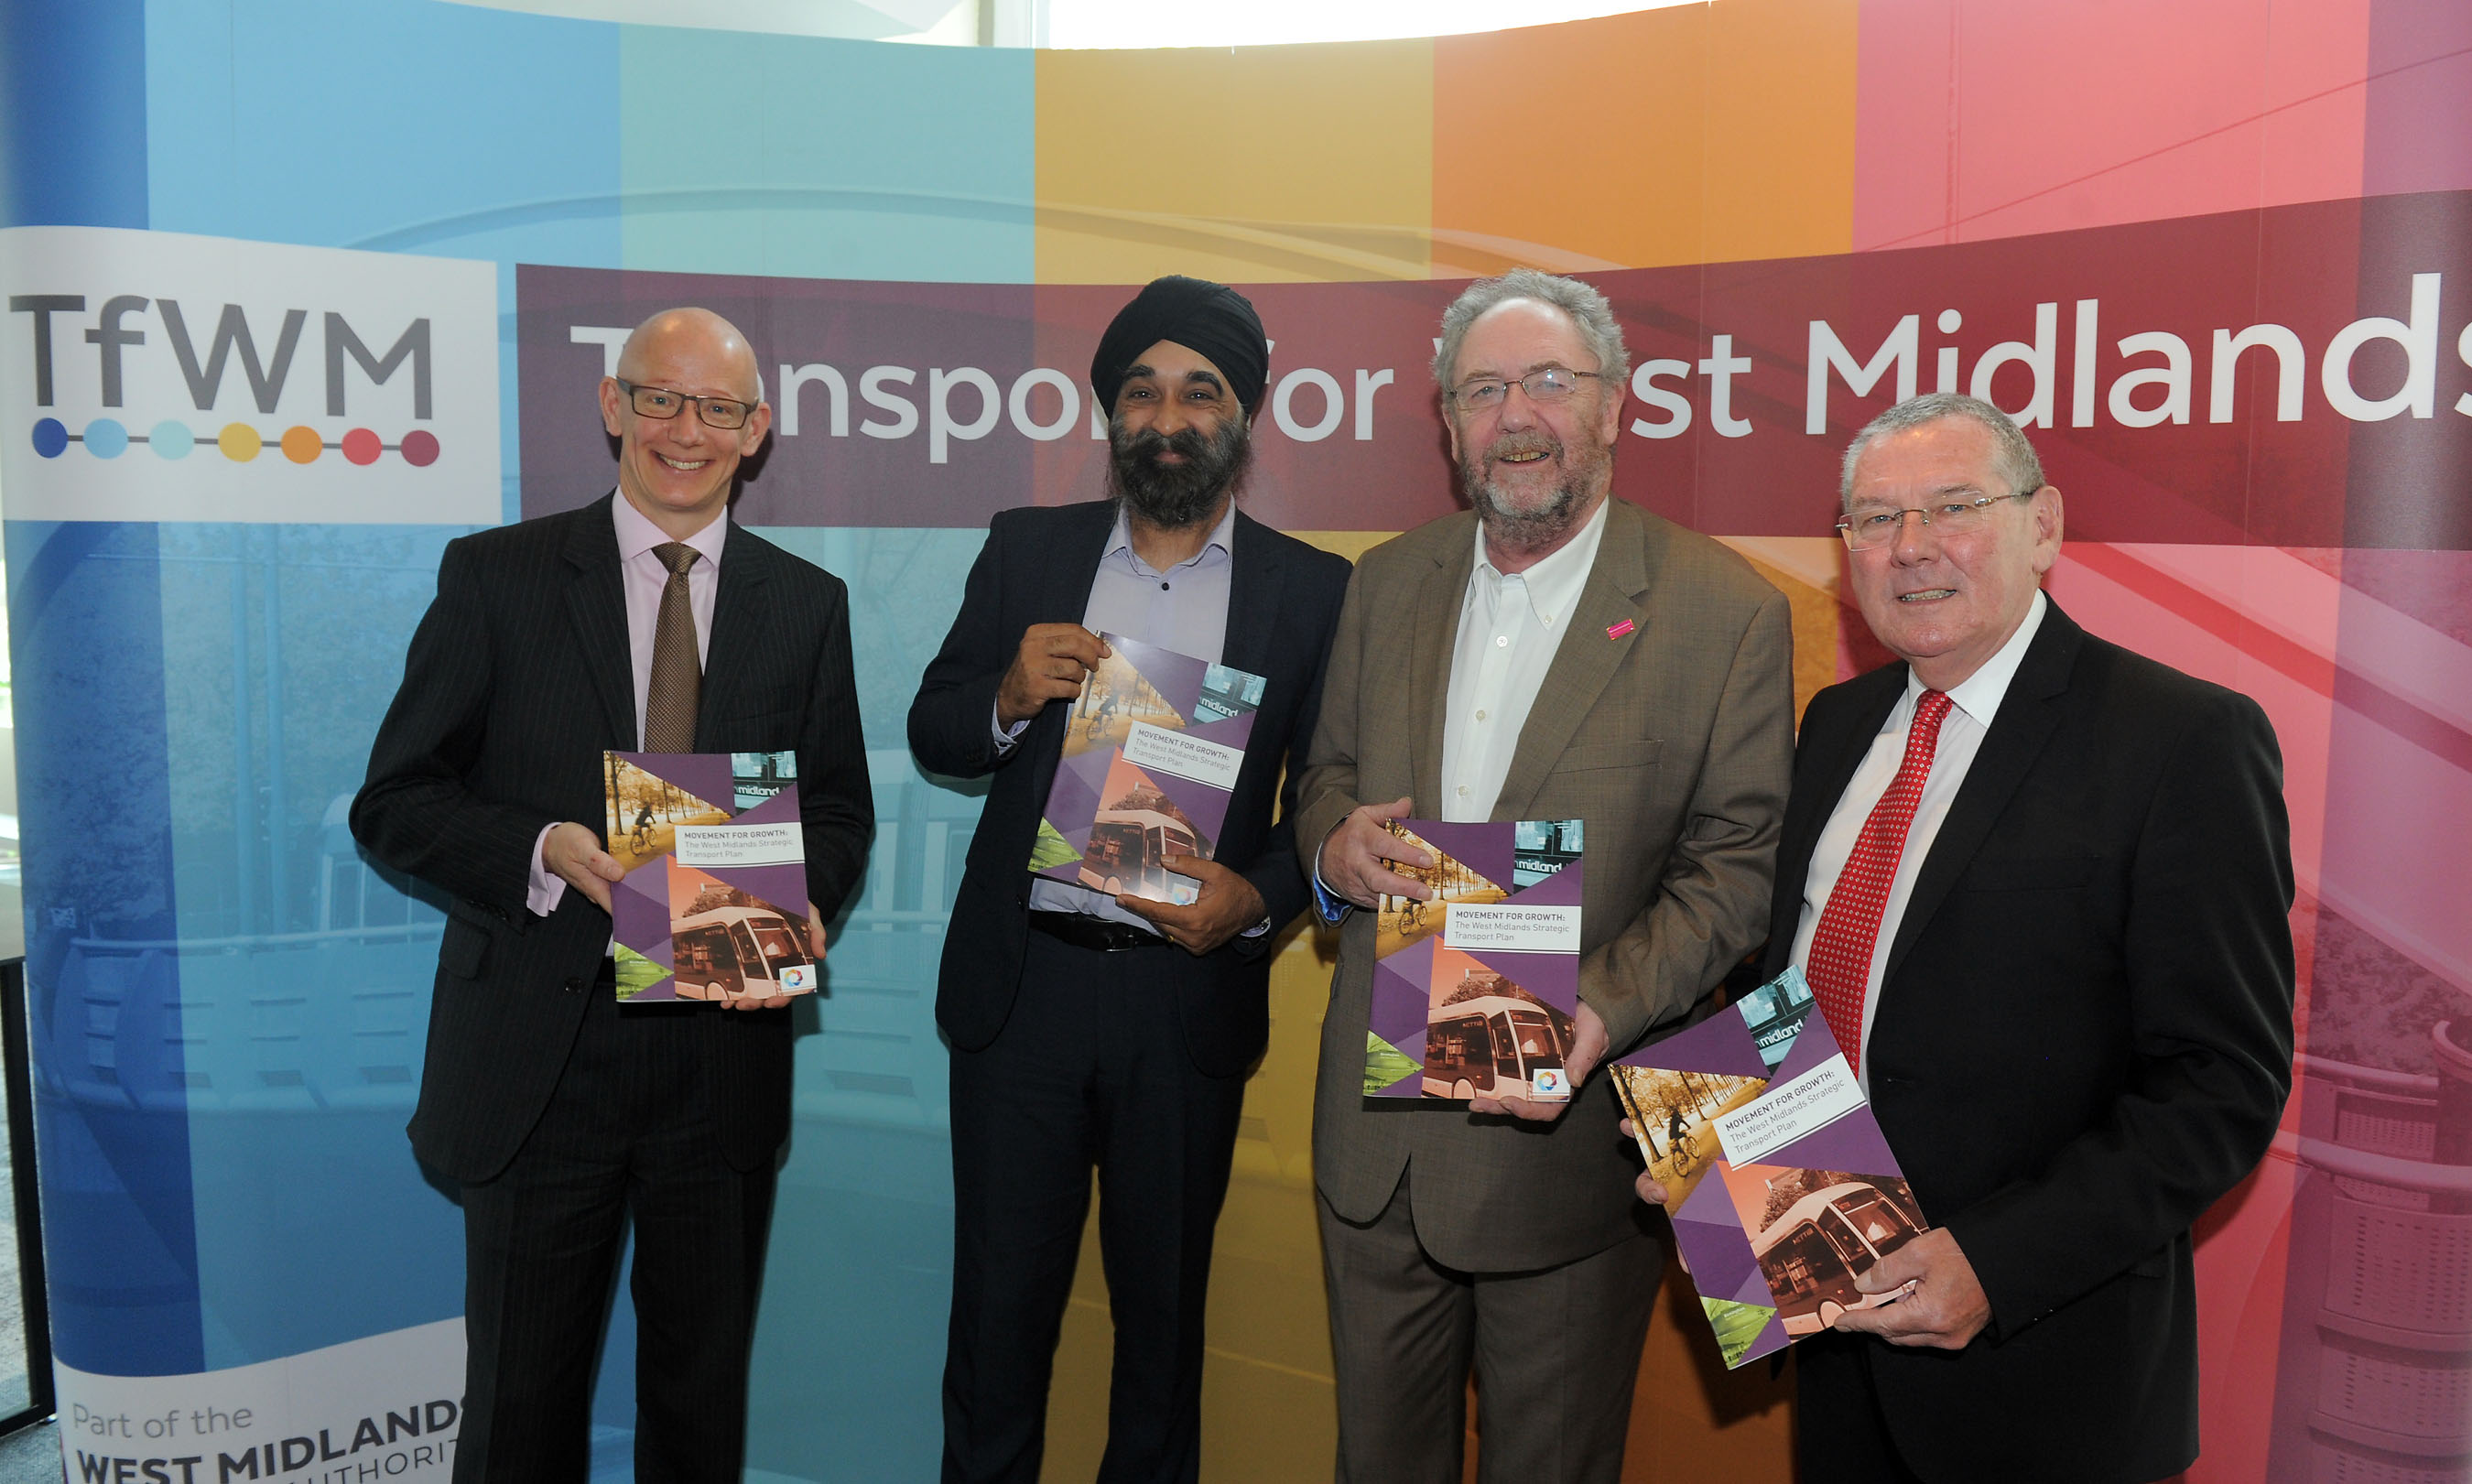 The emerging West Midlands Combined Authority (WMCA) will drive forward more than £4 billion of transport infrastructure over the coming decade, including more tram extensions, new suburban rail lines, cycle routes and better motorways.